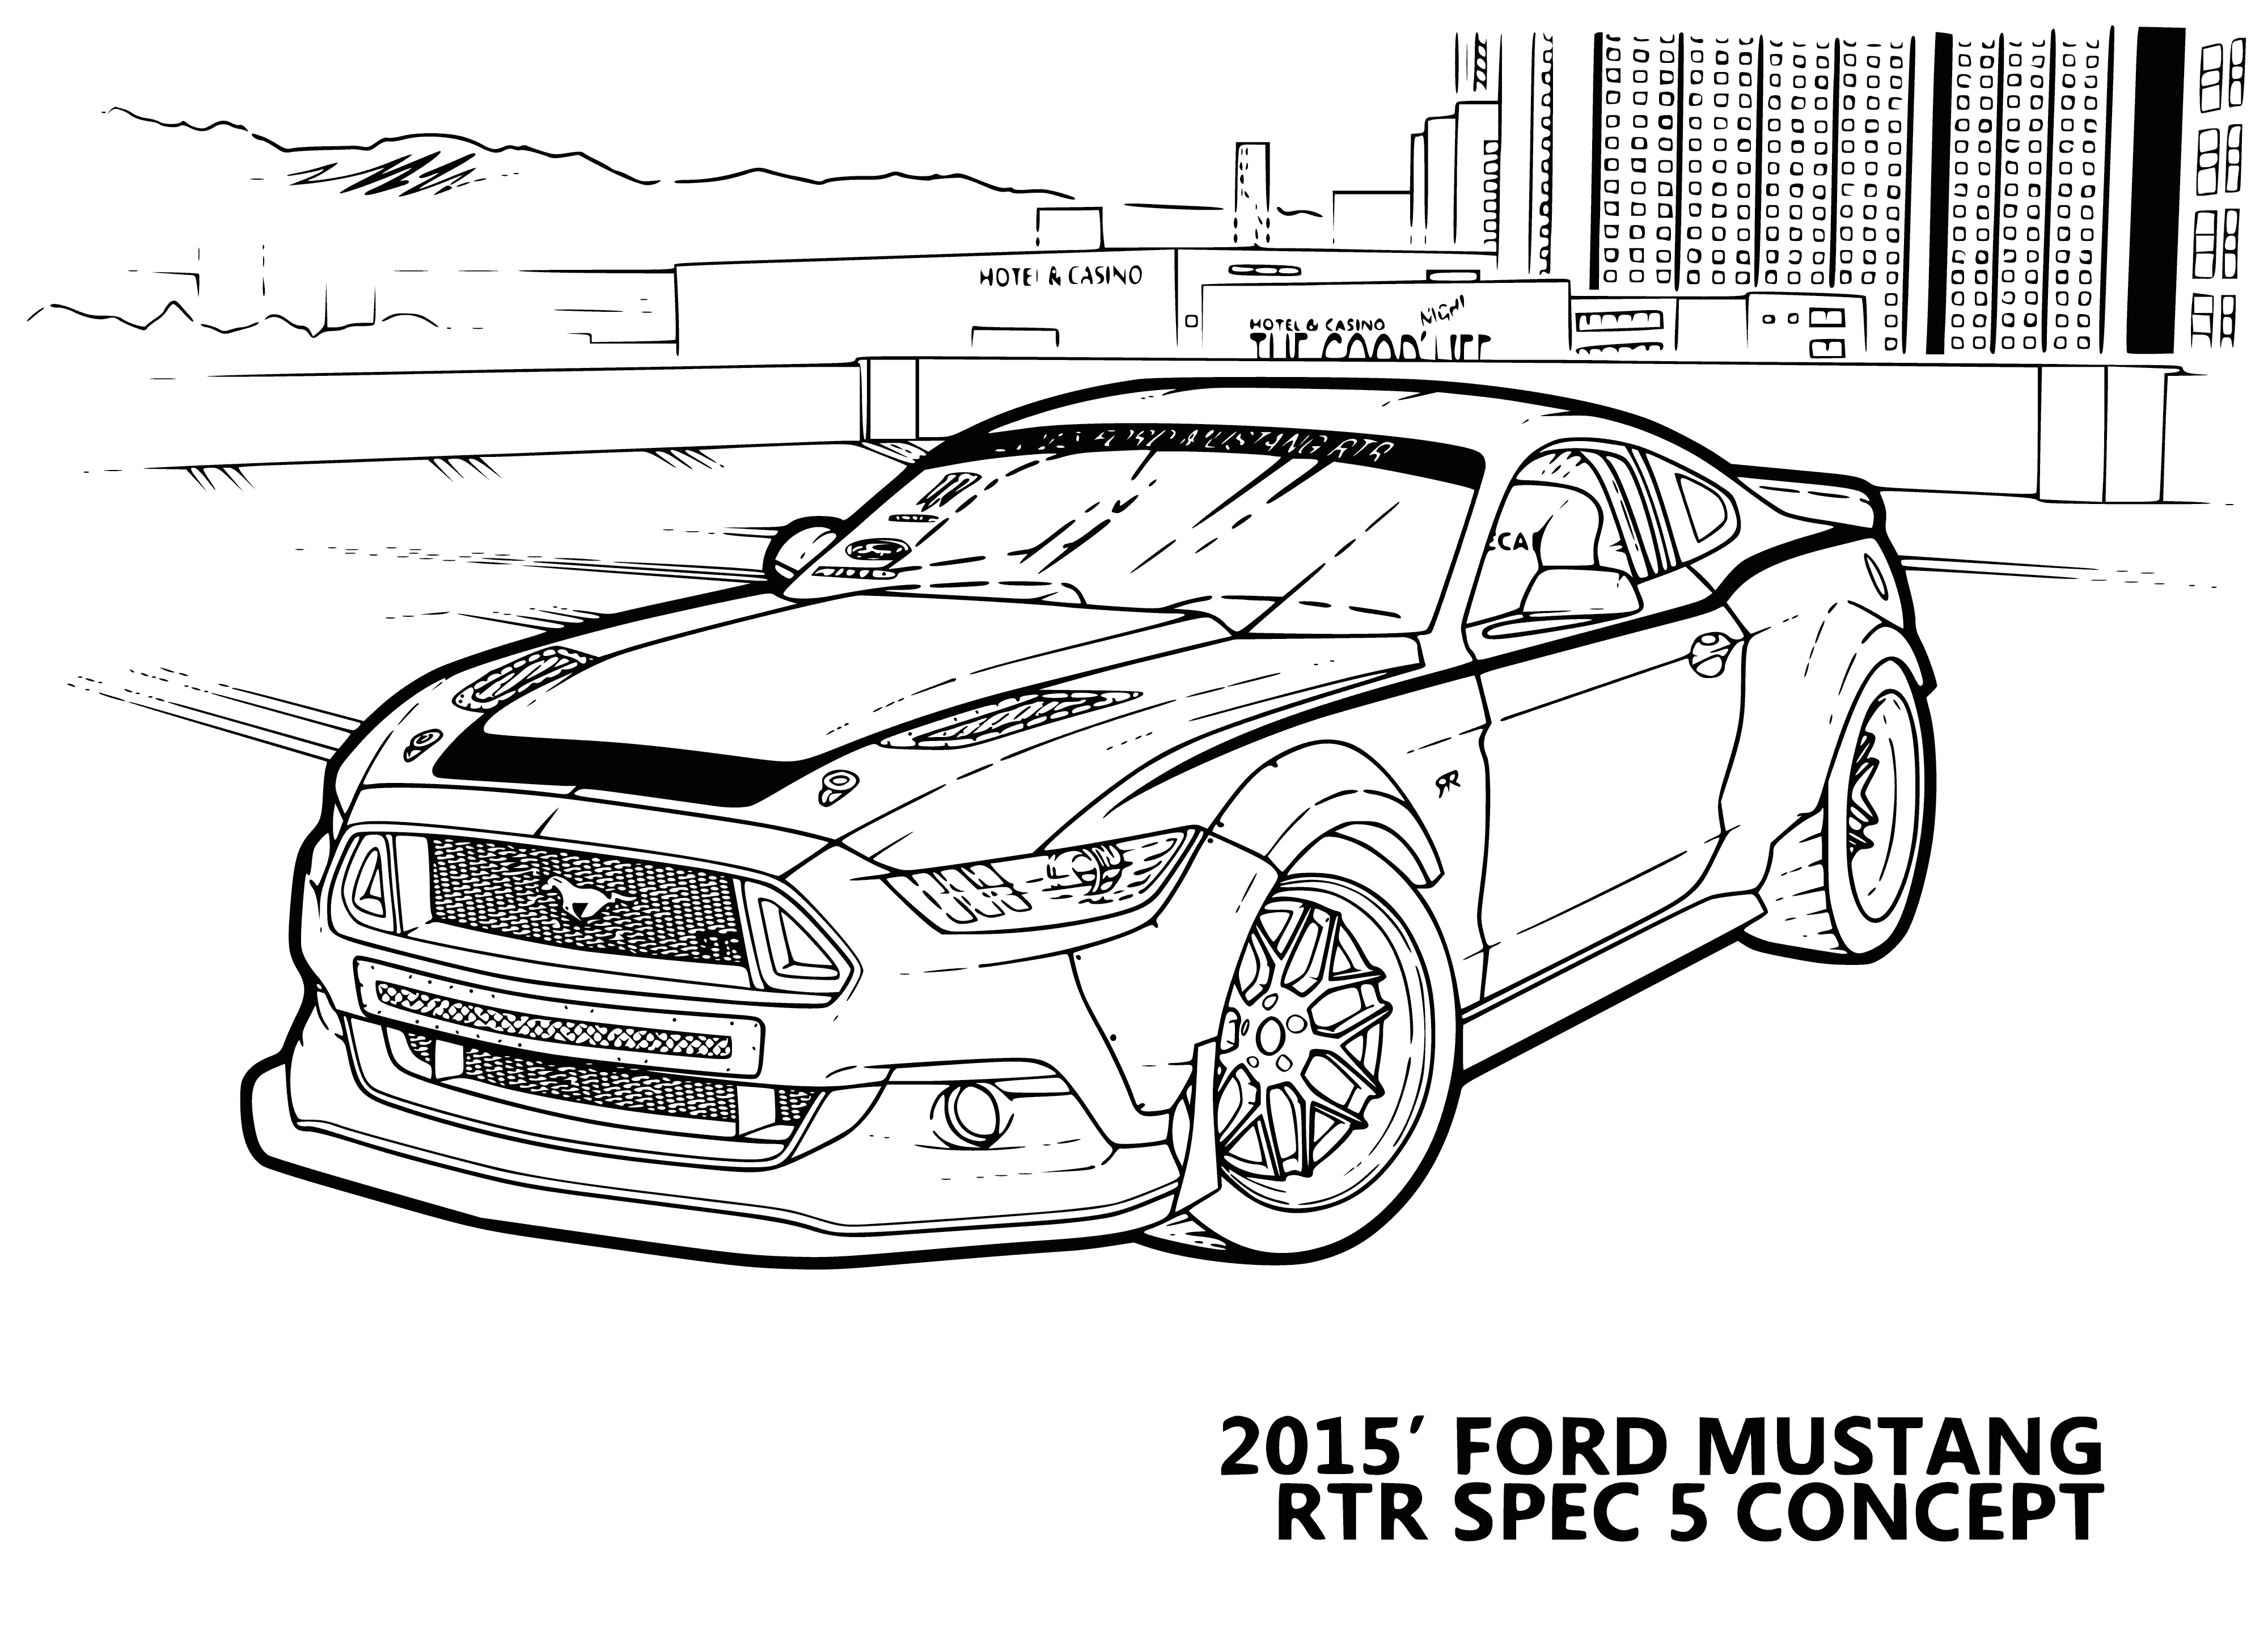 Ford Mustang coloring page